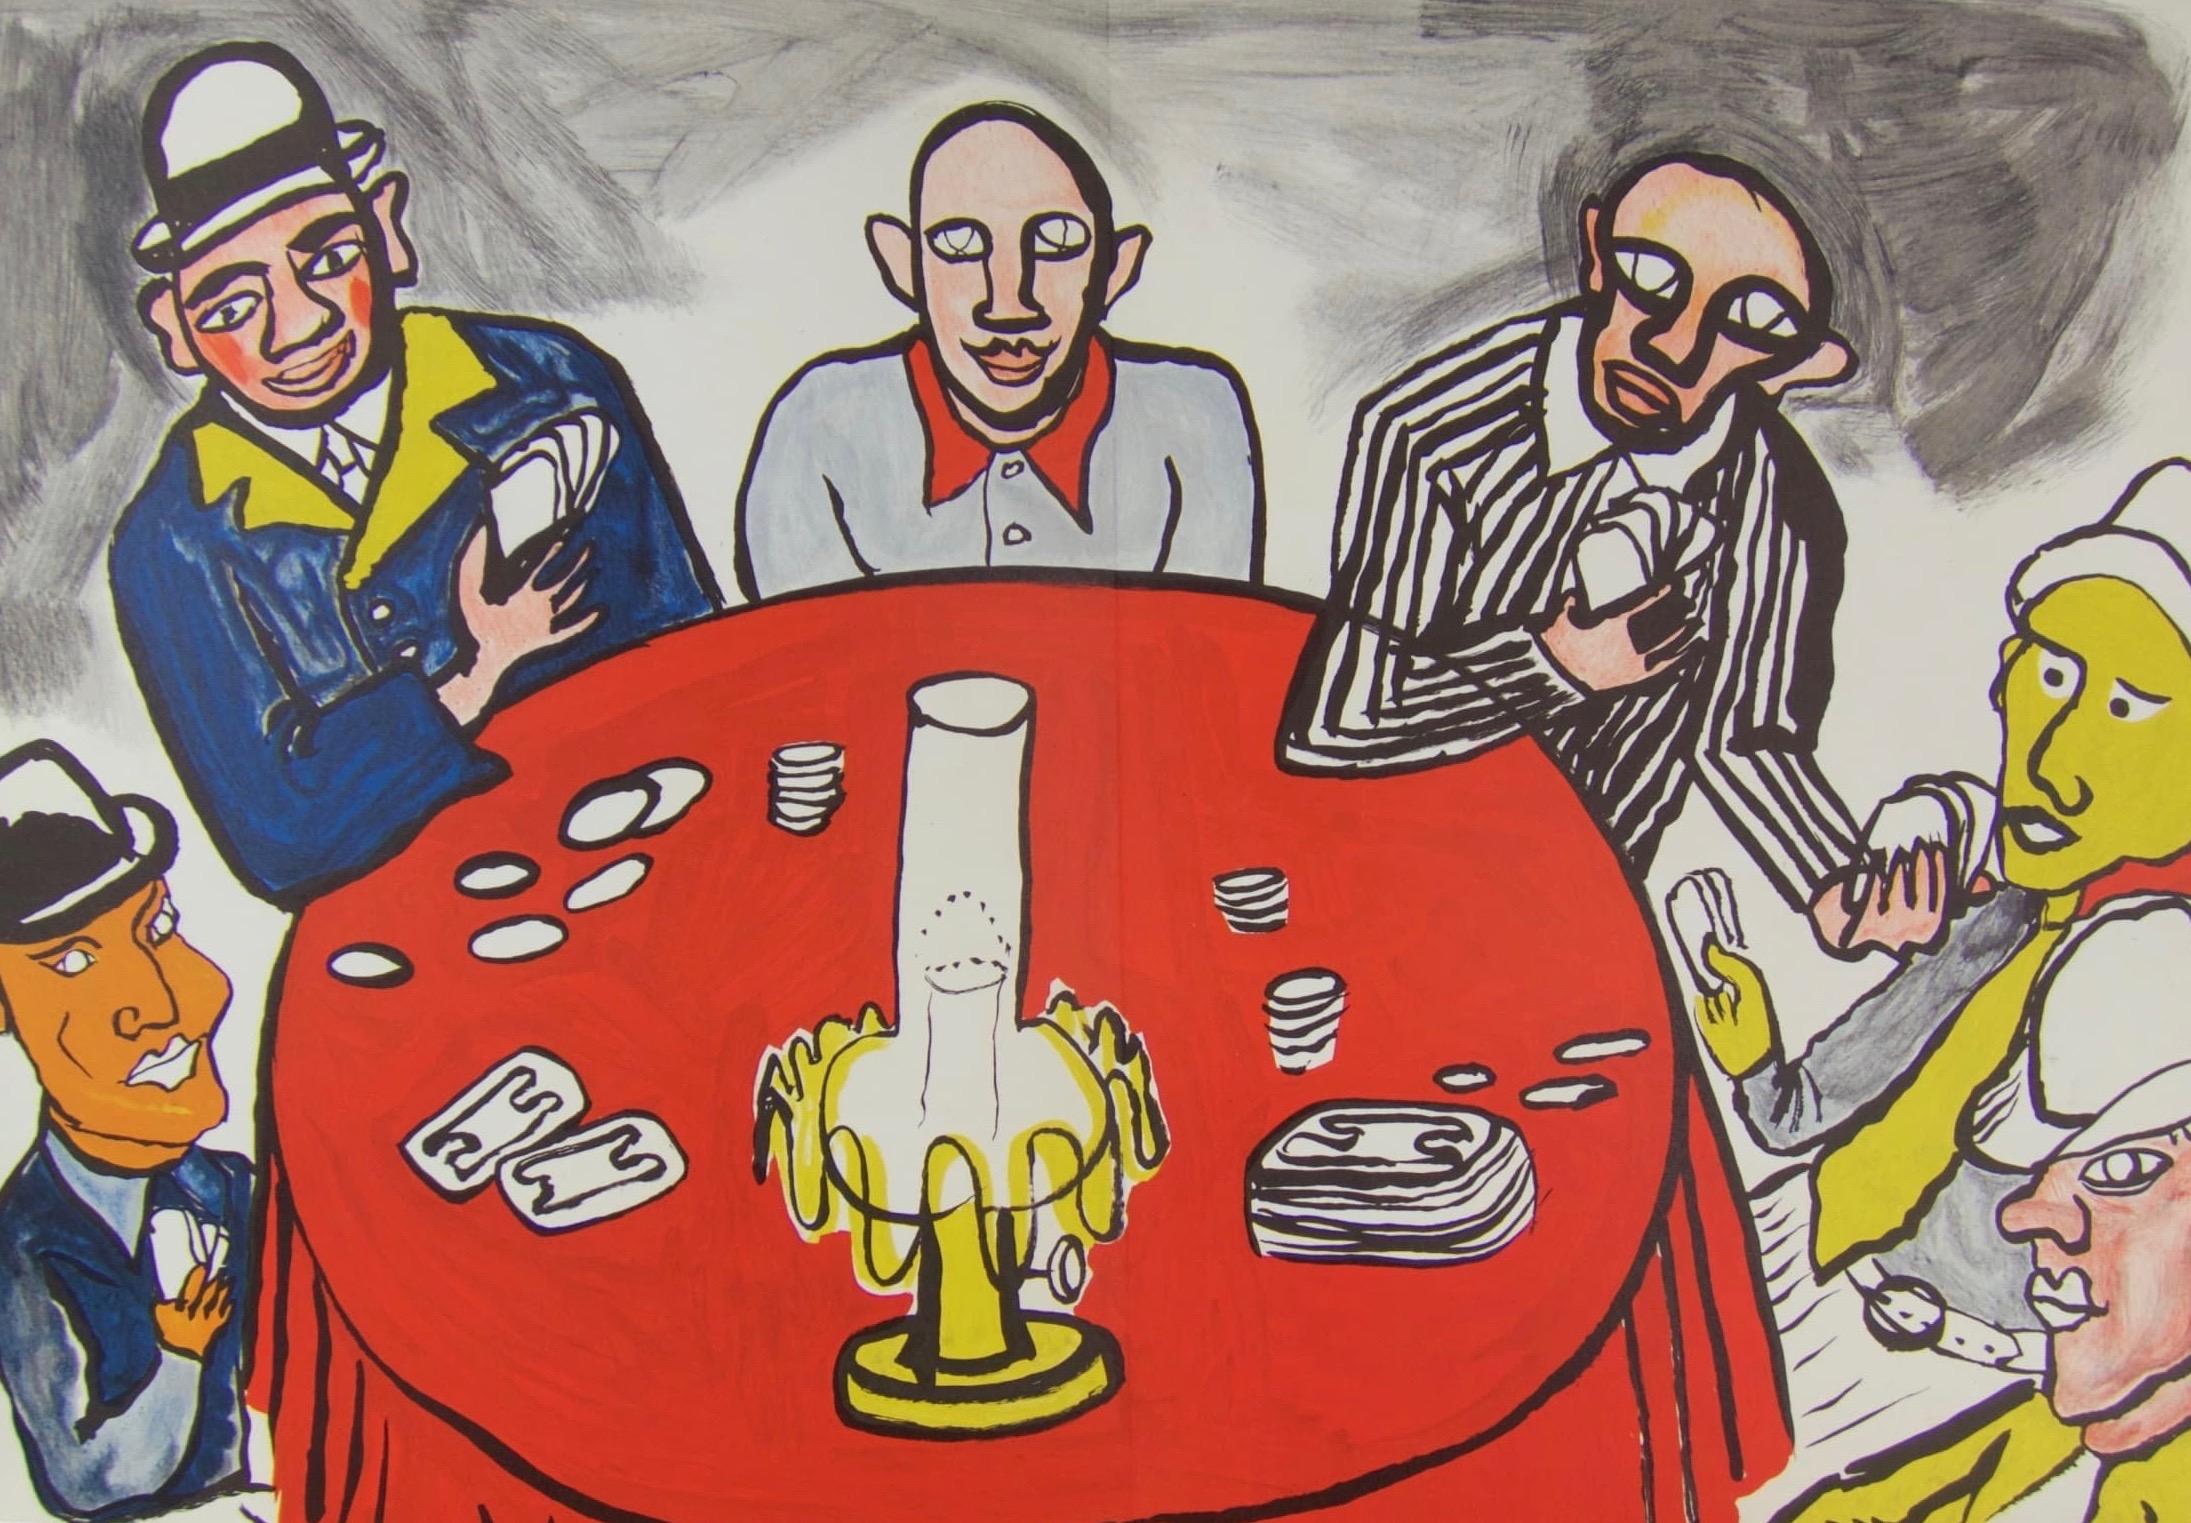 Framed lithograph in color by Alexander Calder of card players from 'Derriere Le Miroir' 
About the artist:  Alexander 'Sandy' Calder (American 1898-1976) is one of the most important artists of the 20th century.  Known for his sculptures and